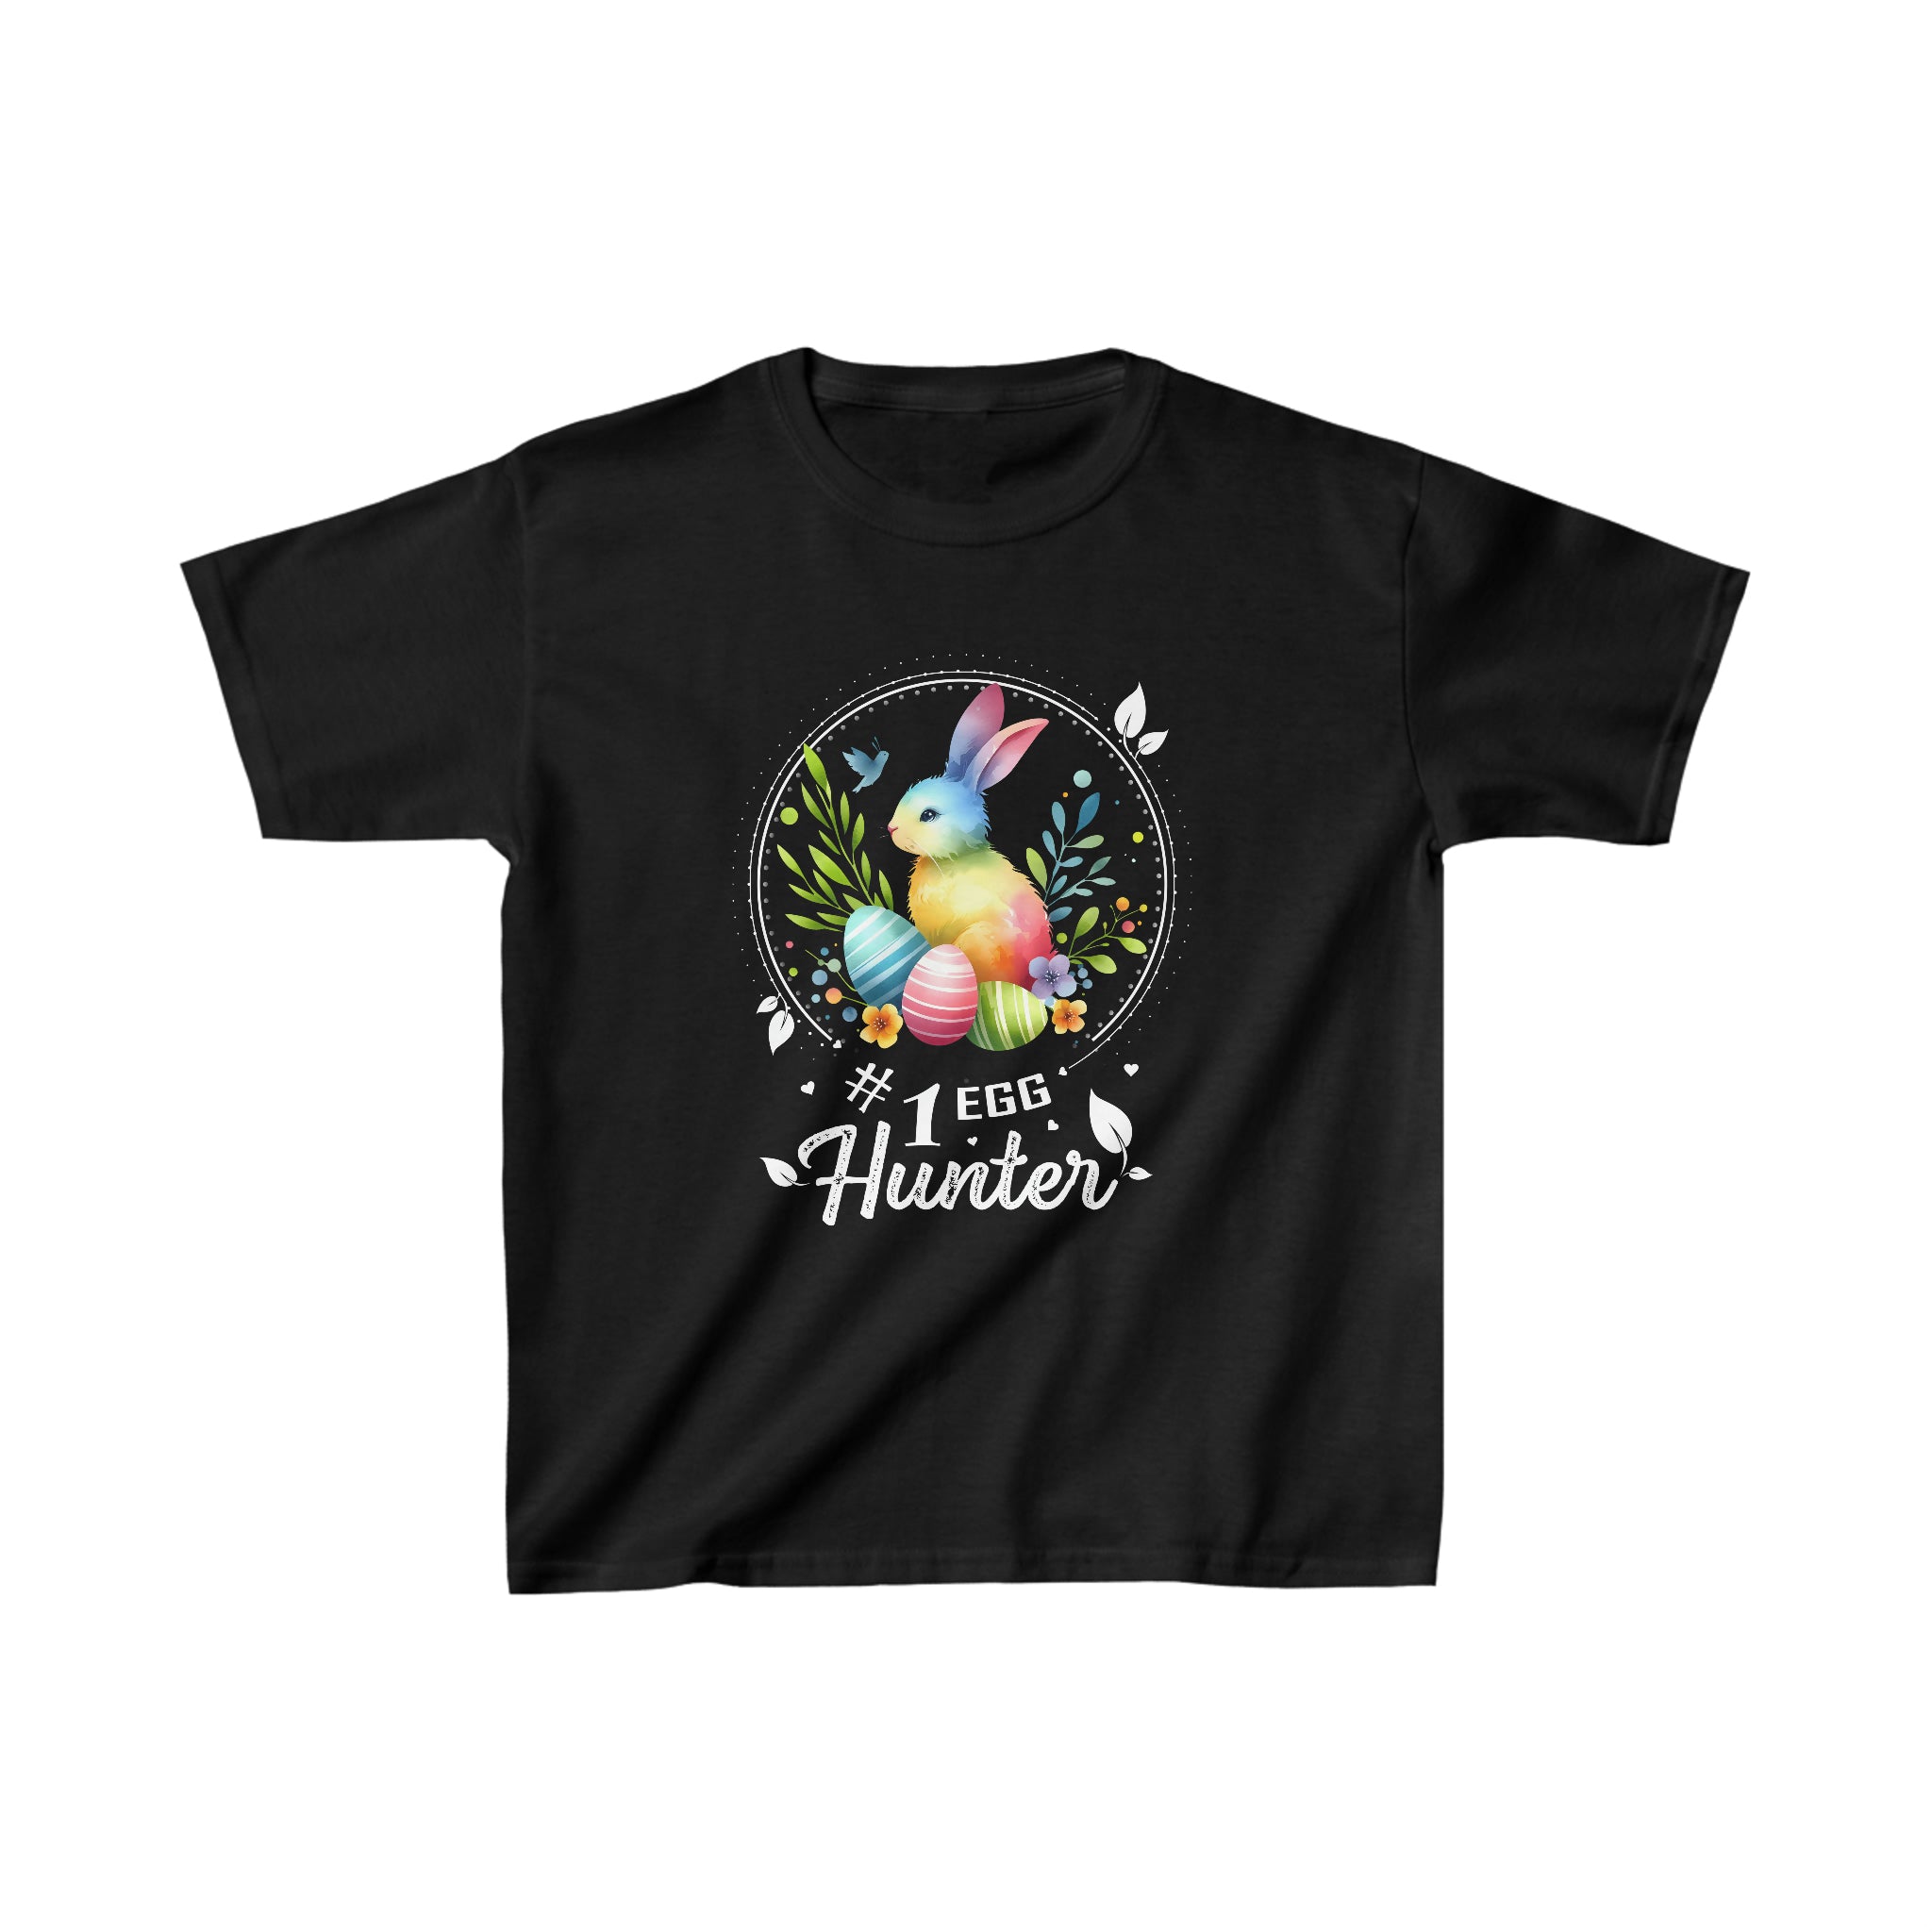 Easter Shirts for Kids Cute Easter Shirts Kids Easter Shirts for Boys